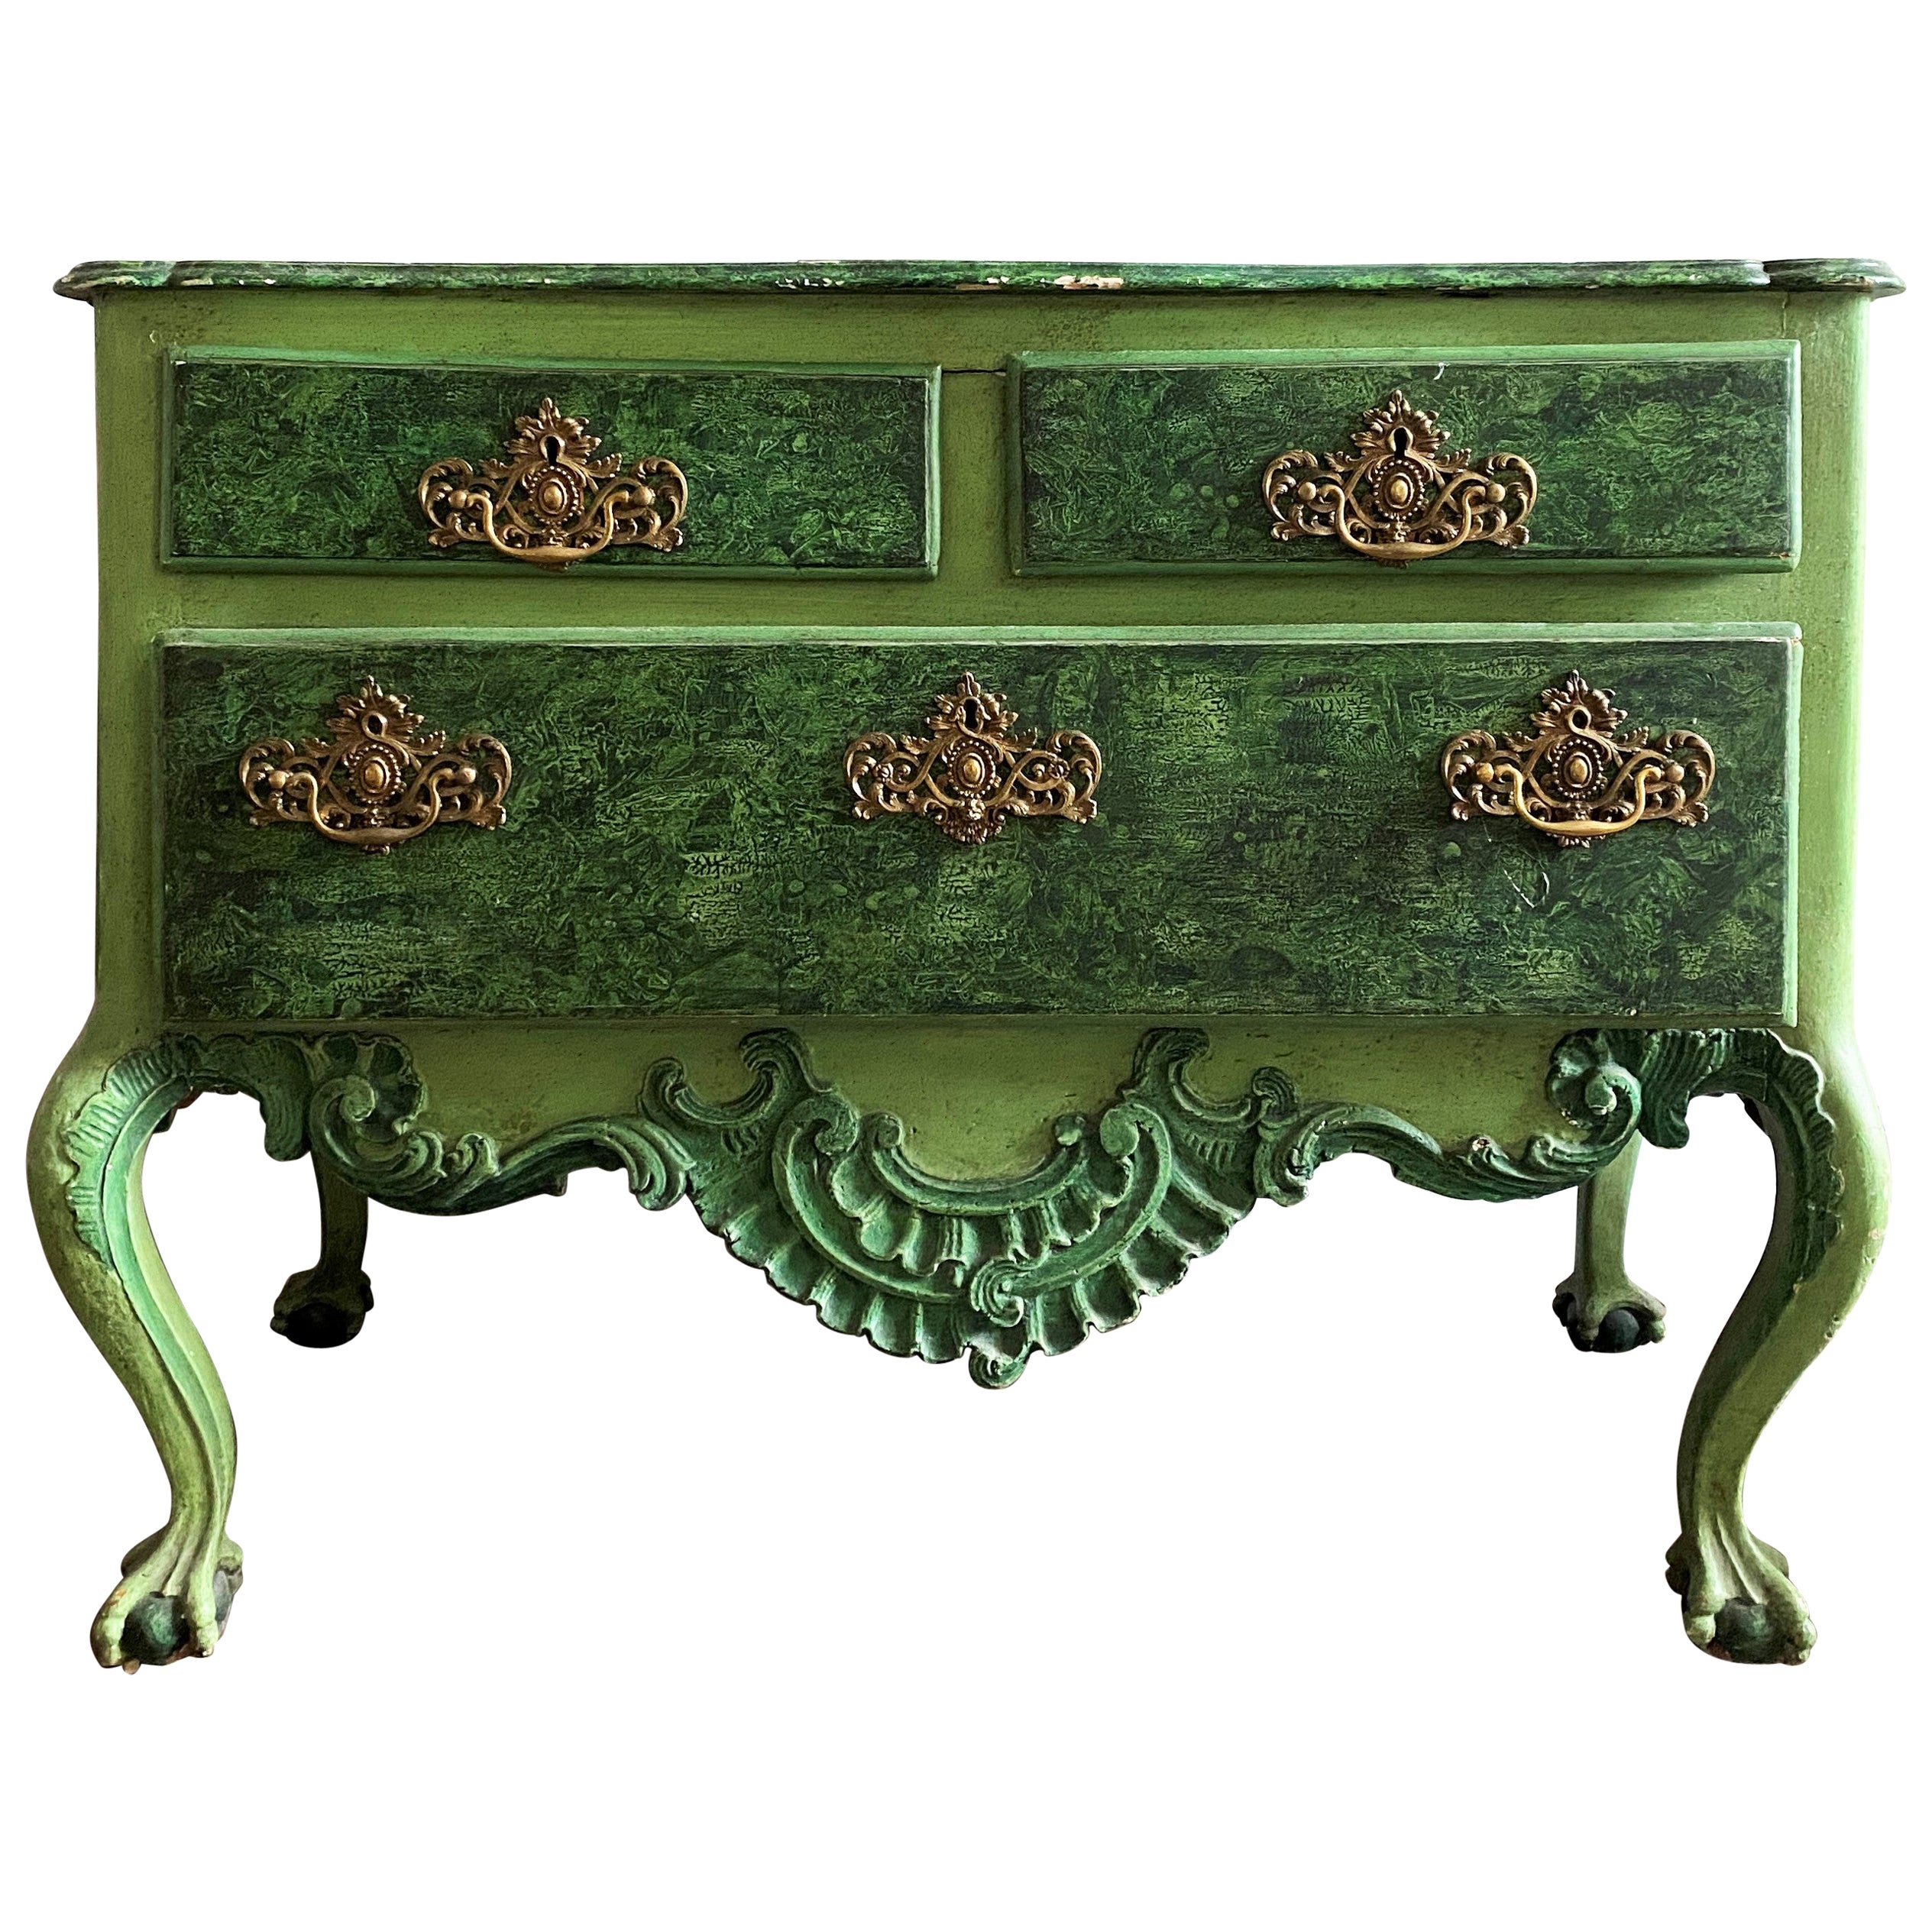 Portuguese Sauteuse Chest of Drawers 18th Century